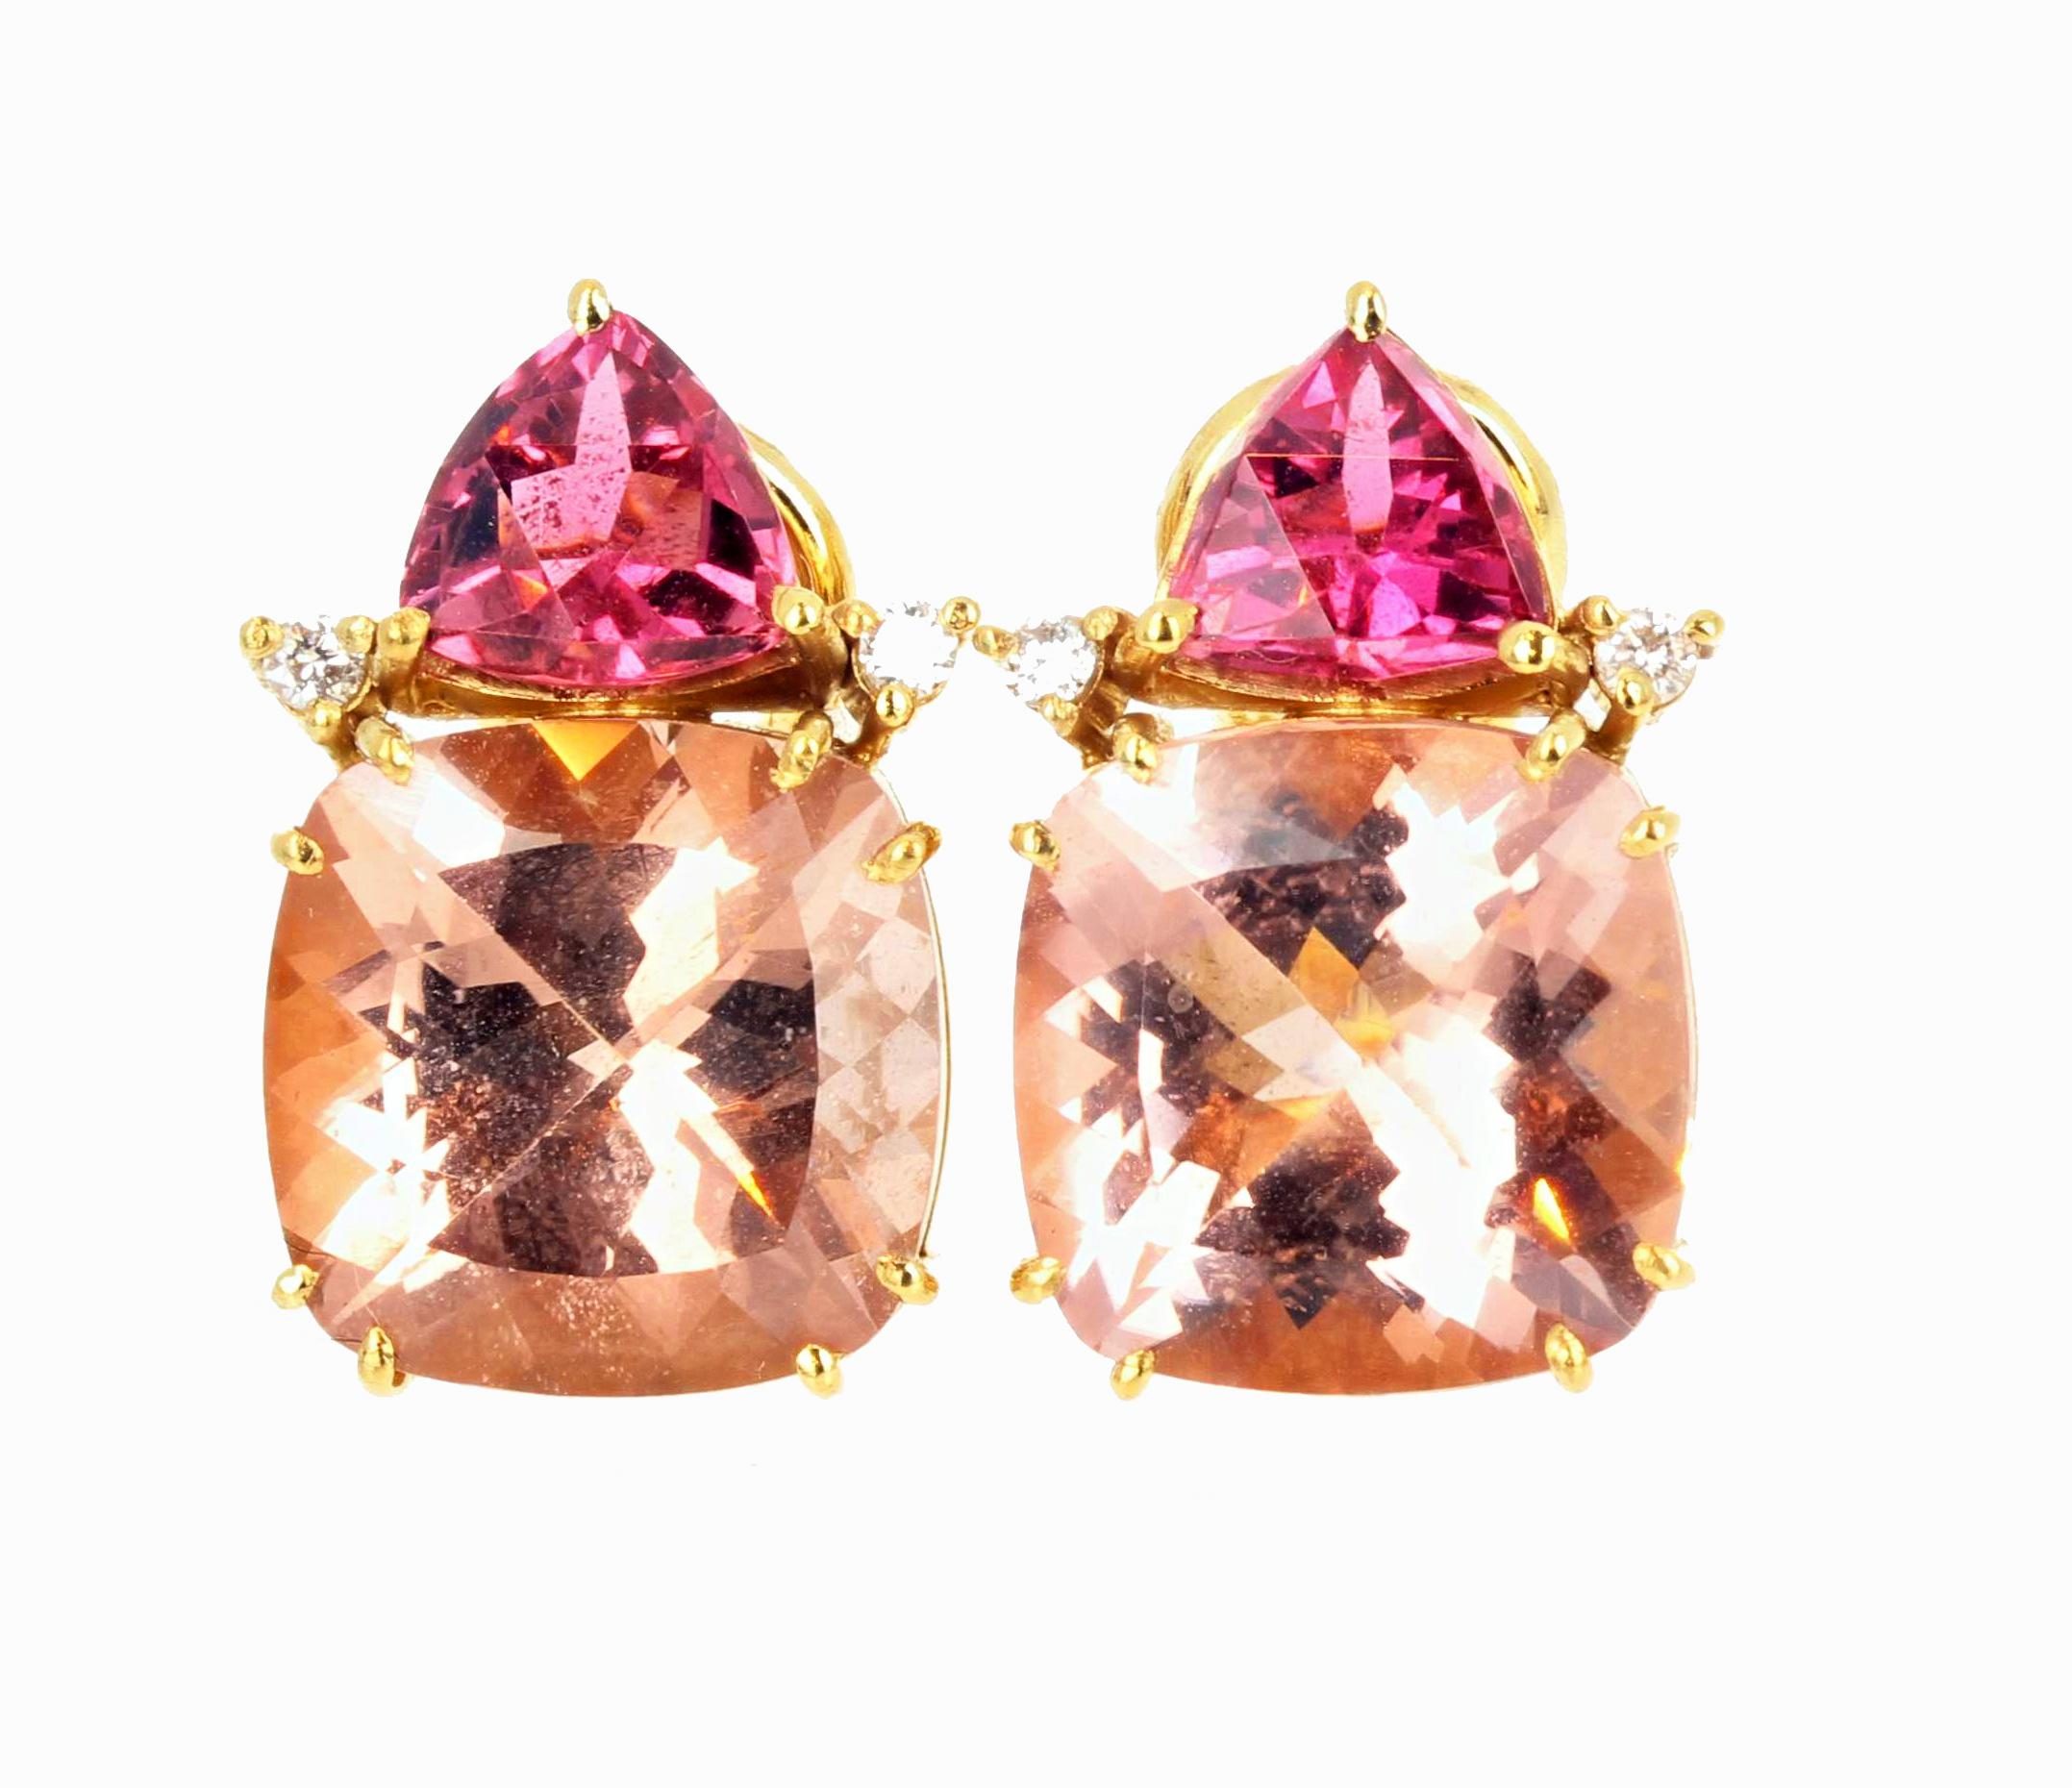 These earrings are truly elegant and are meant for all special occasions !  The largest gemstone is an approximately 8 carats natural blush pink Morganite.  The top gemstone is a trillion cut  is approximately 1.87 carats pink Tourmaline with two